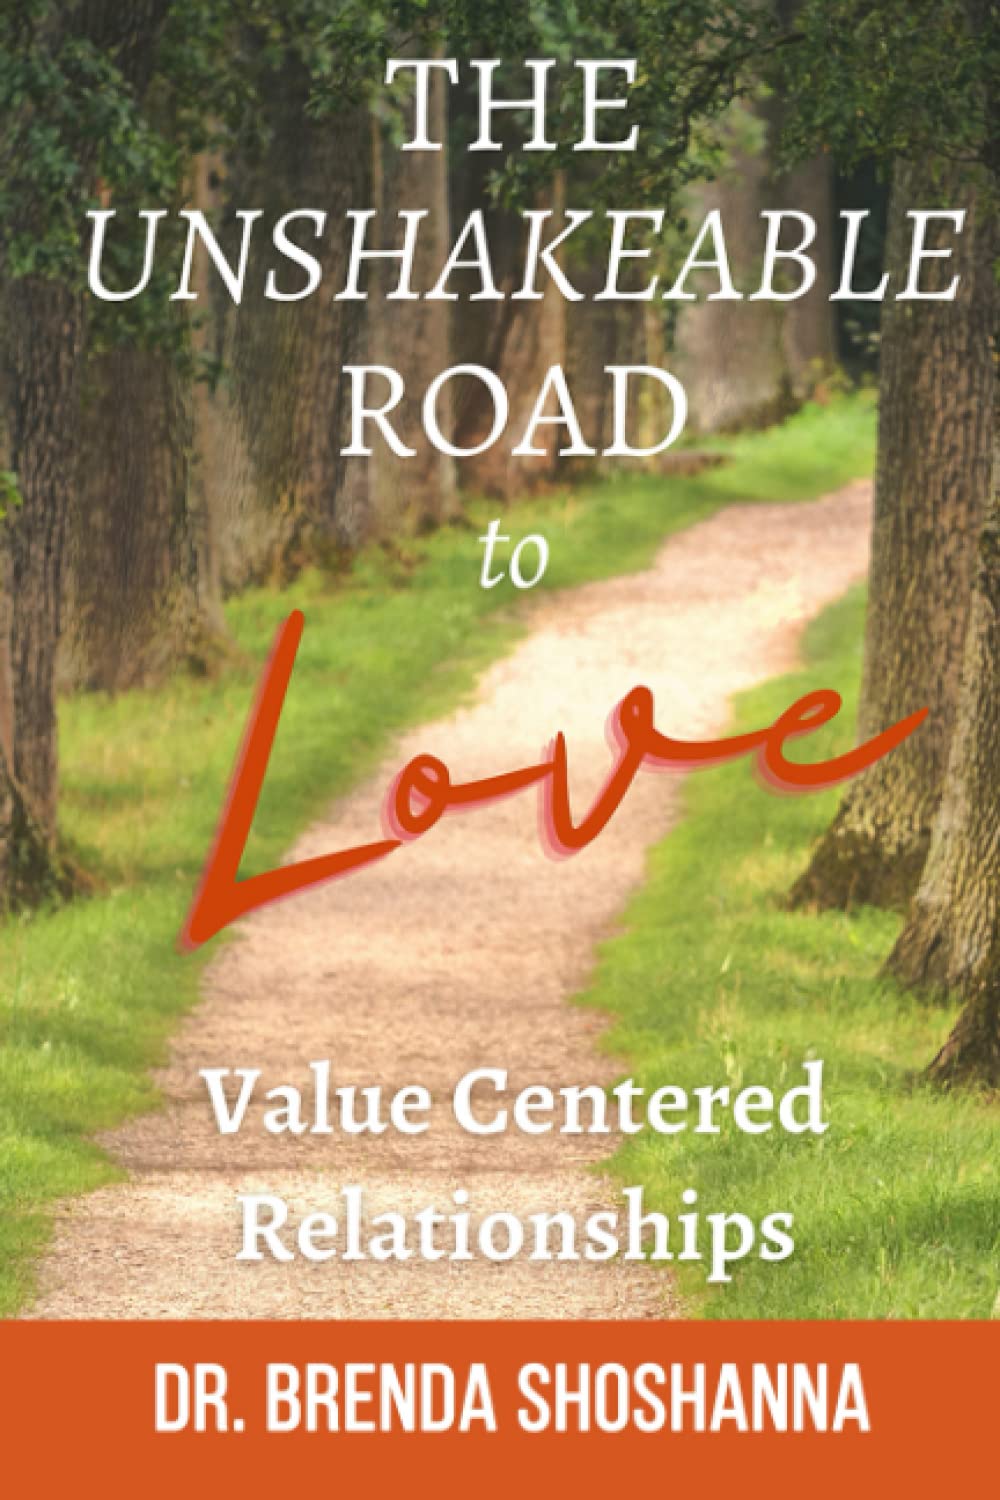 New book "The Unshakable Road to Love: Value Centered Relationships" by Brenda Shoshanna, Ph.D. is released, an empowering, spiritual guide to viewing love and relationships in a radically new way